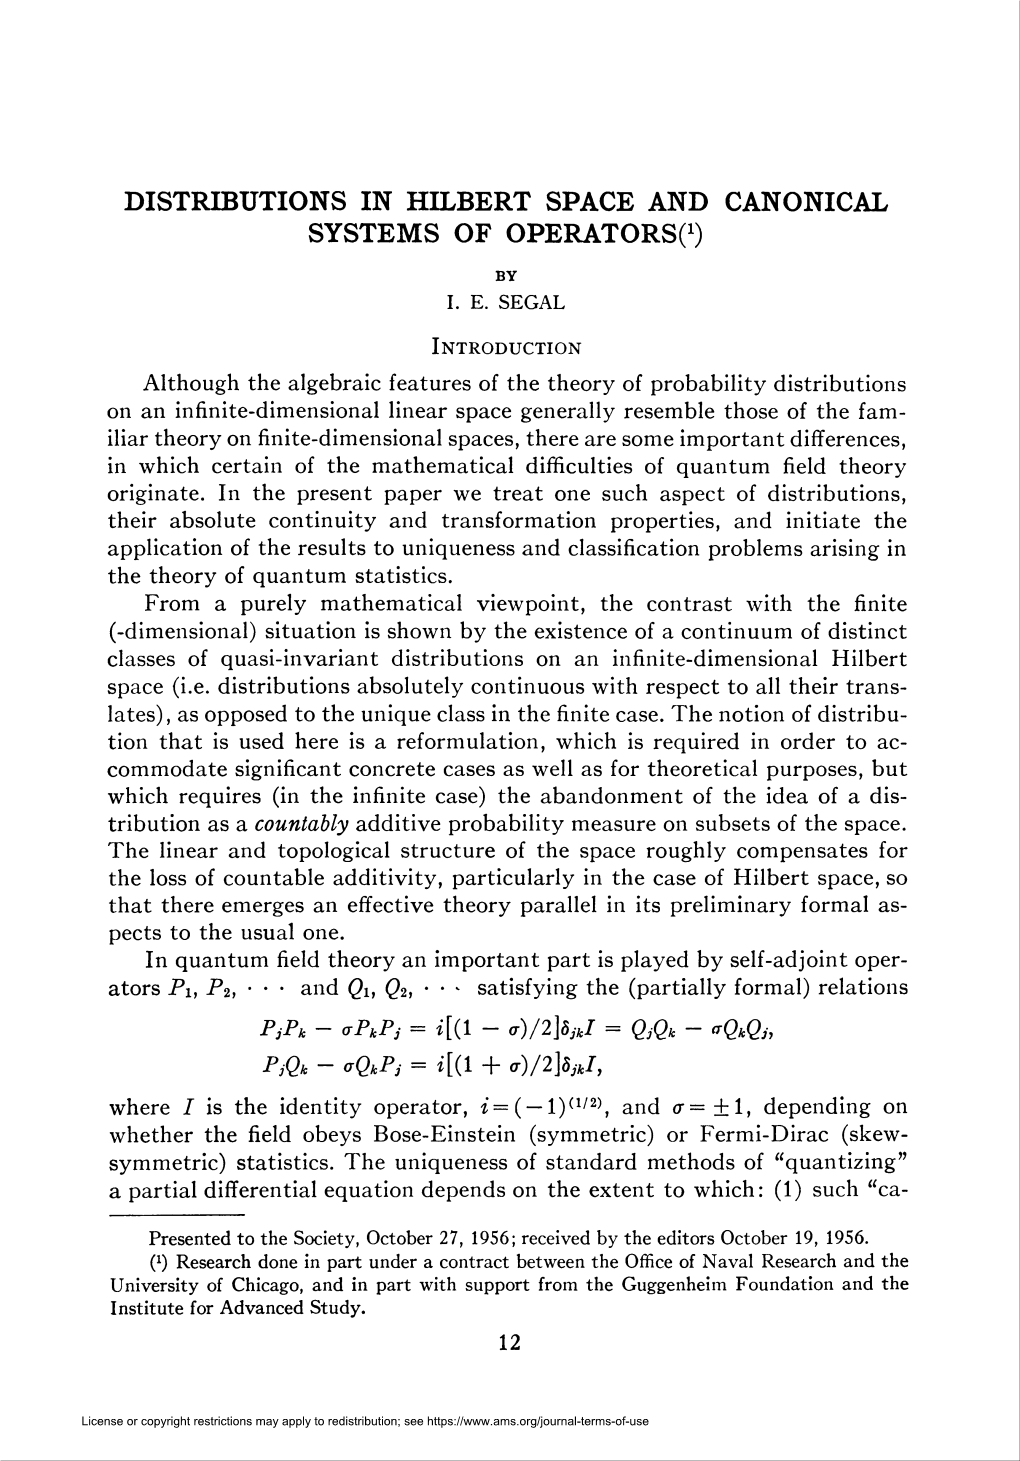 Distributions in Hilbert Space and Canonical Systems of Operators^)